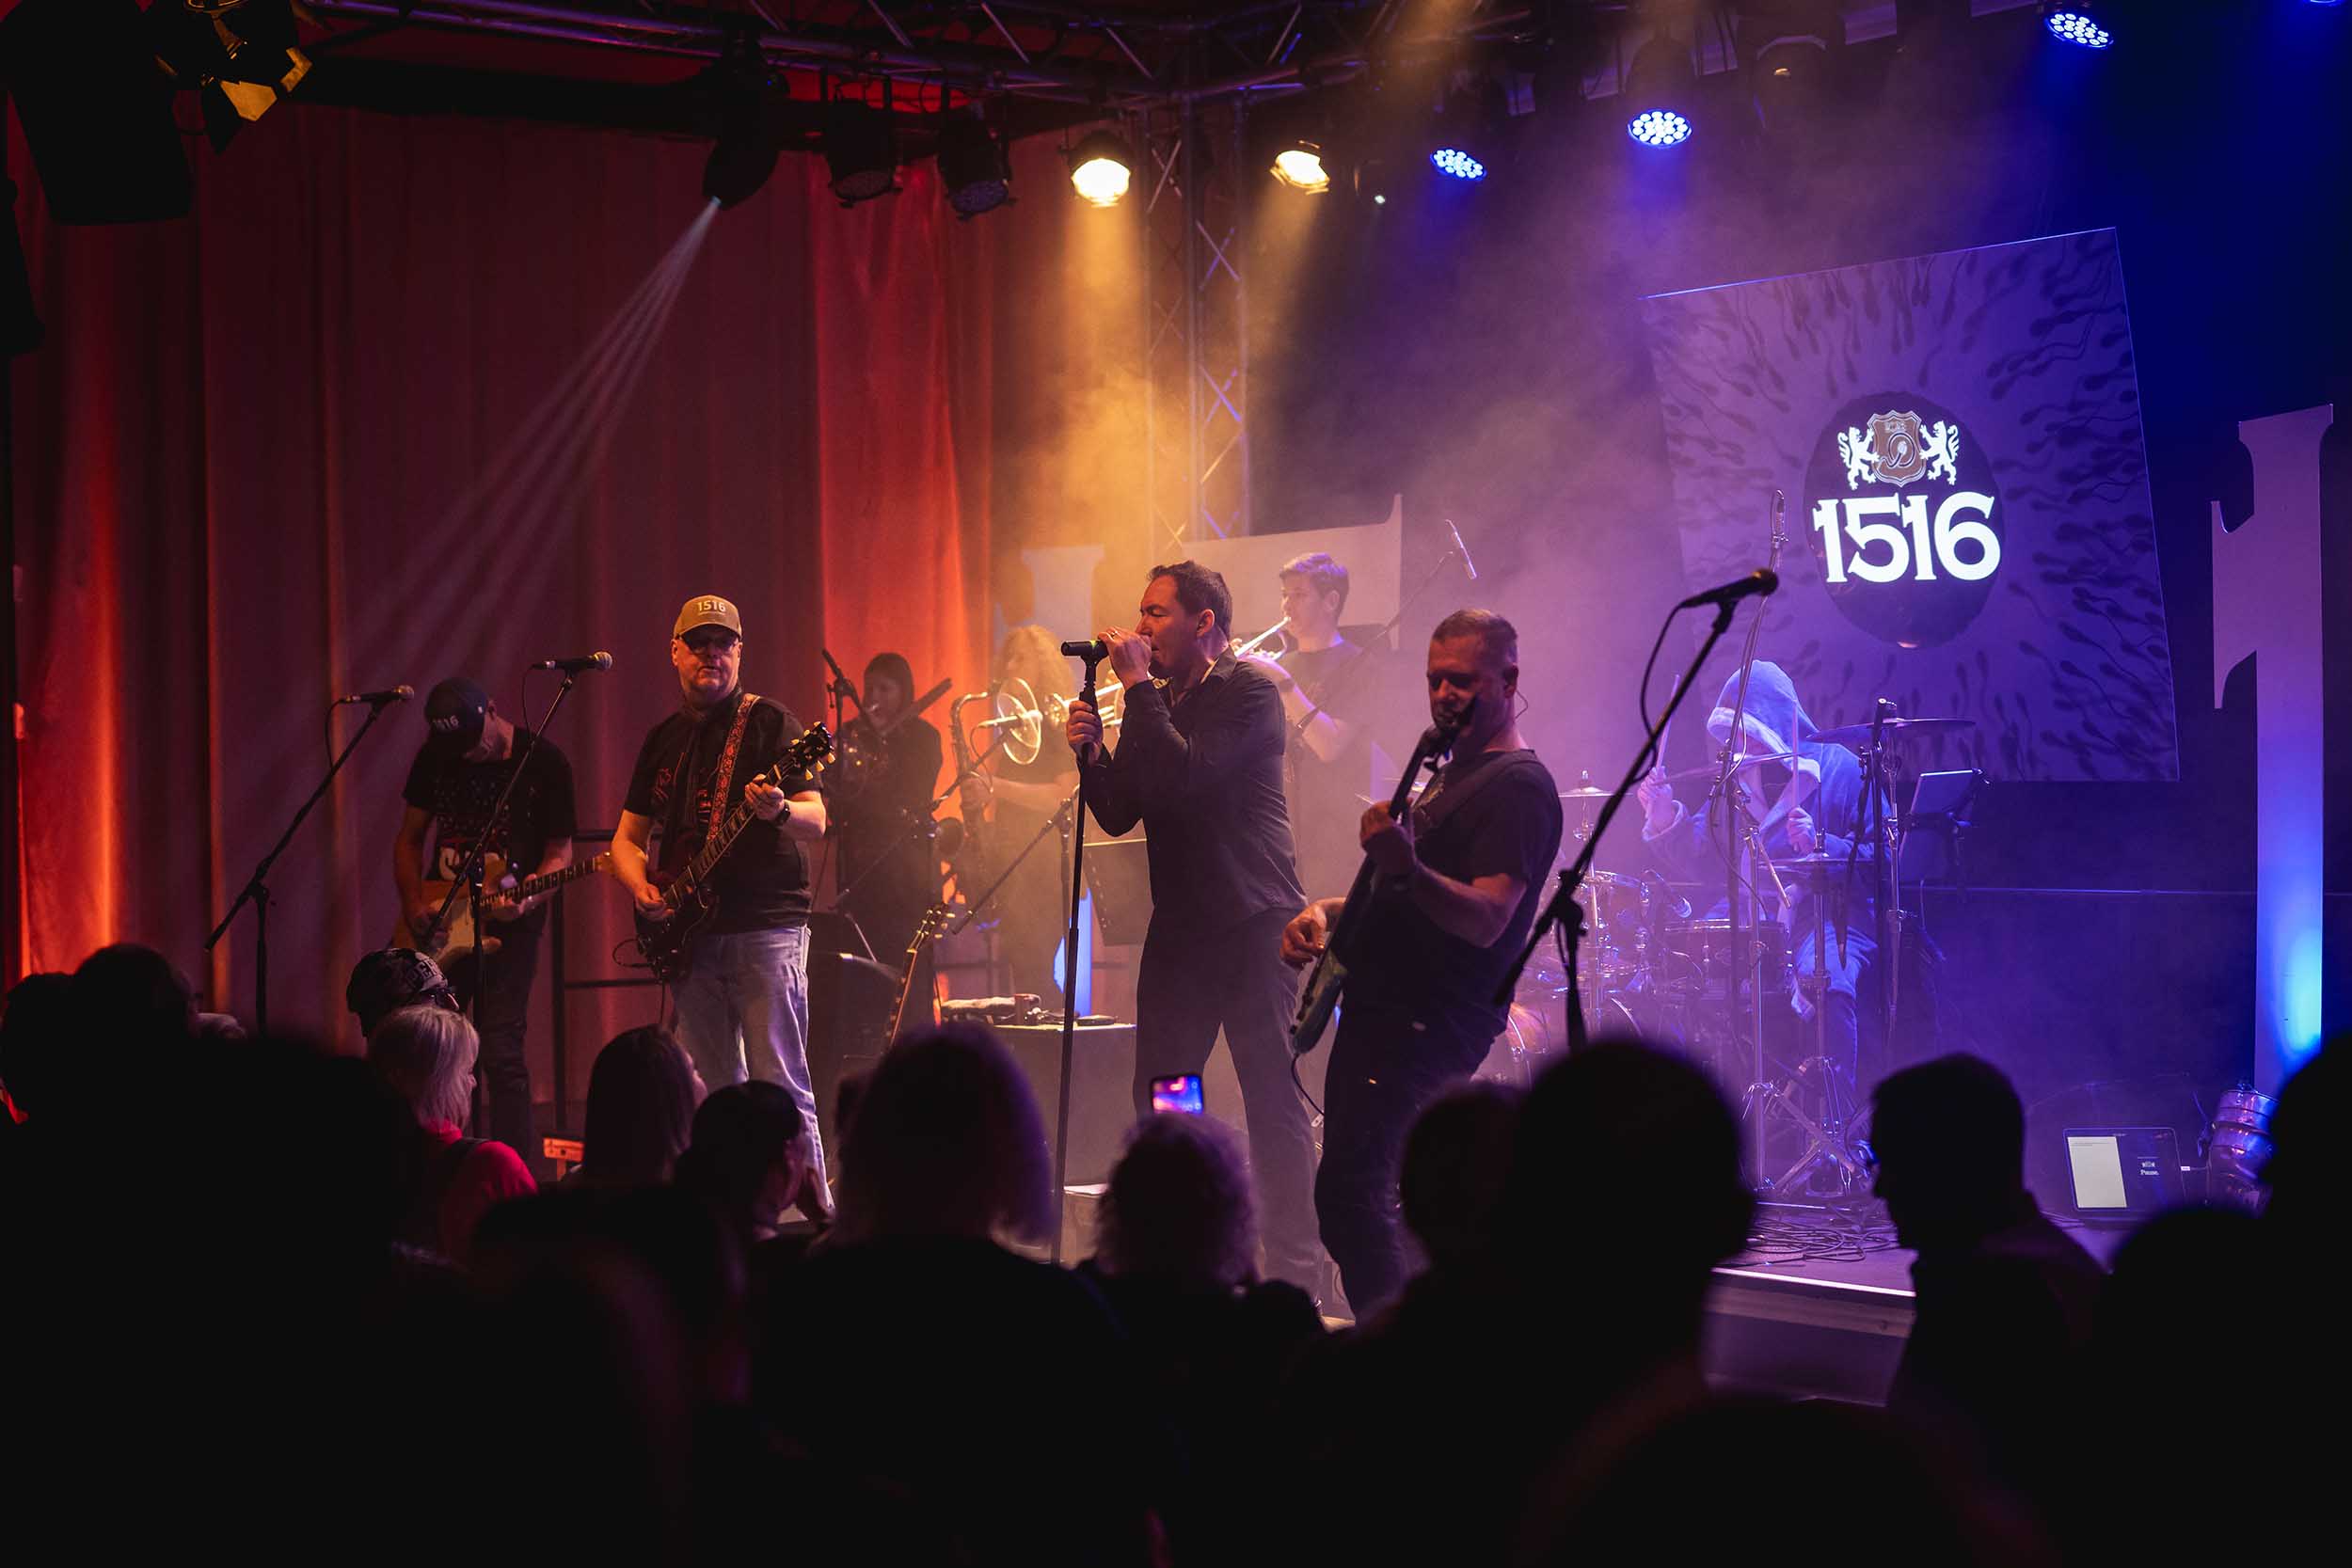 1516 style | 1516 – BORN TO... The 2023 concert | Images by Matthias Merz 2022